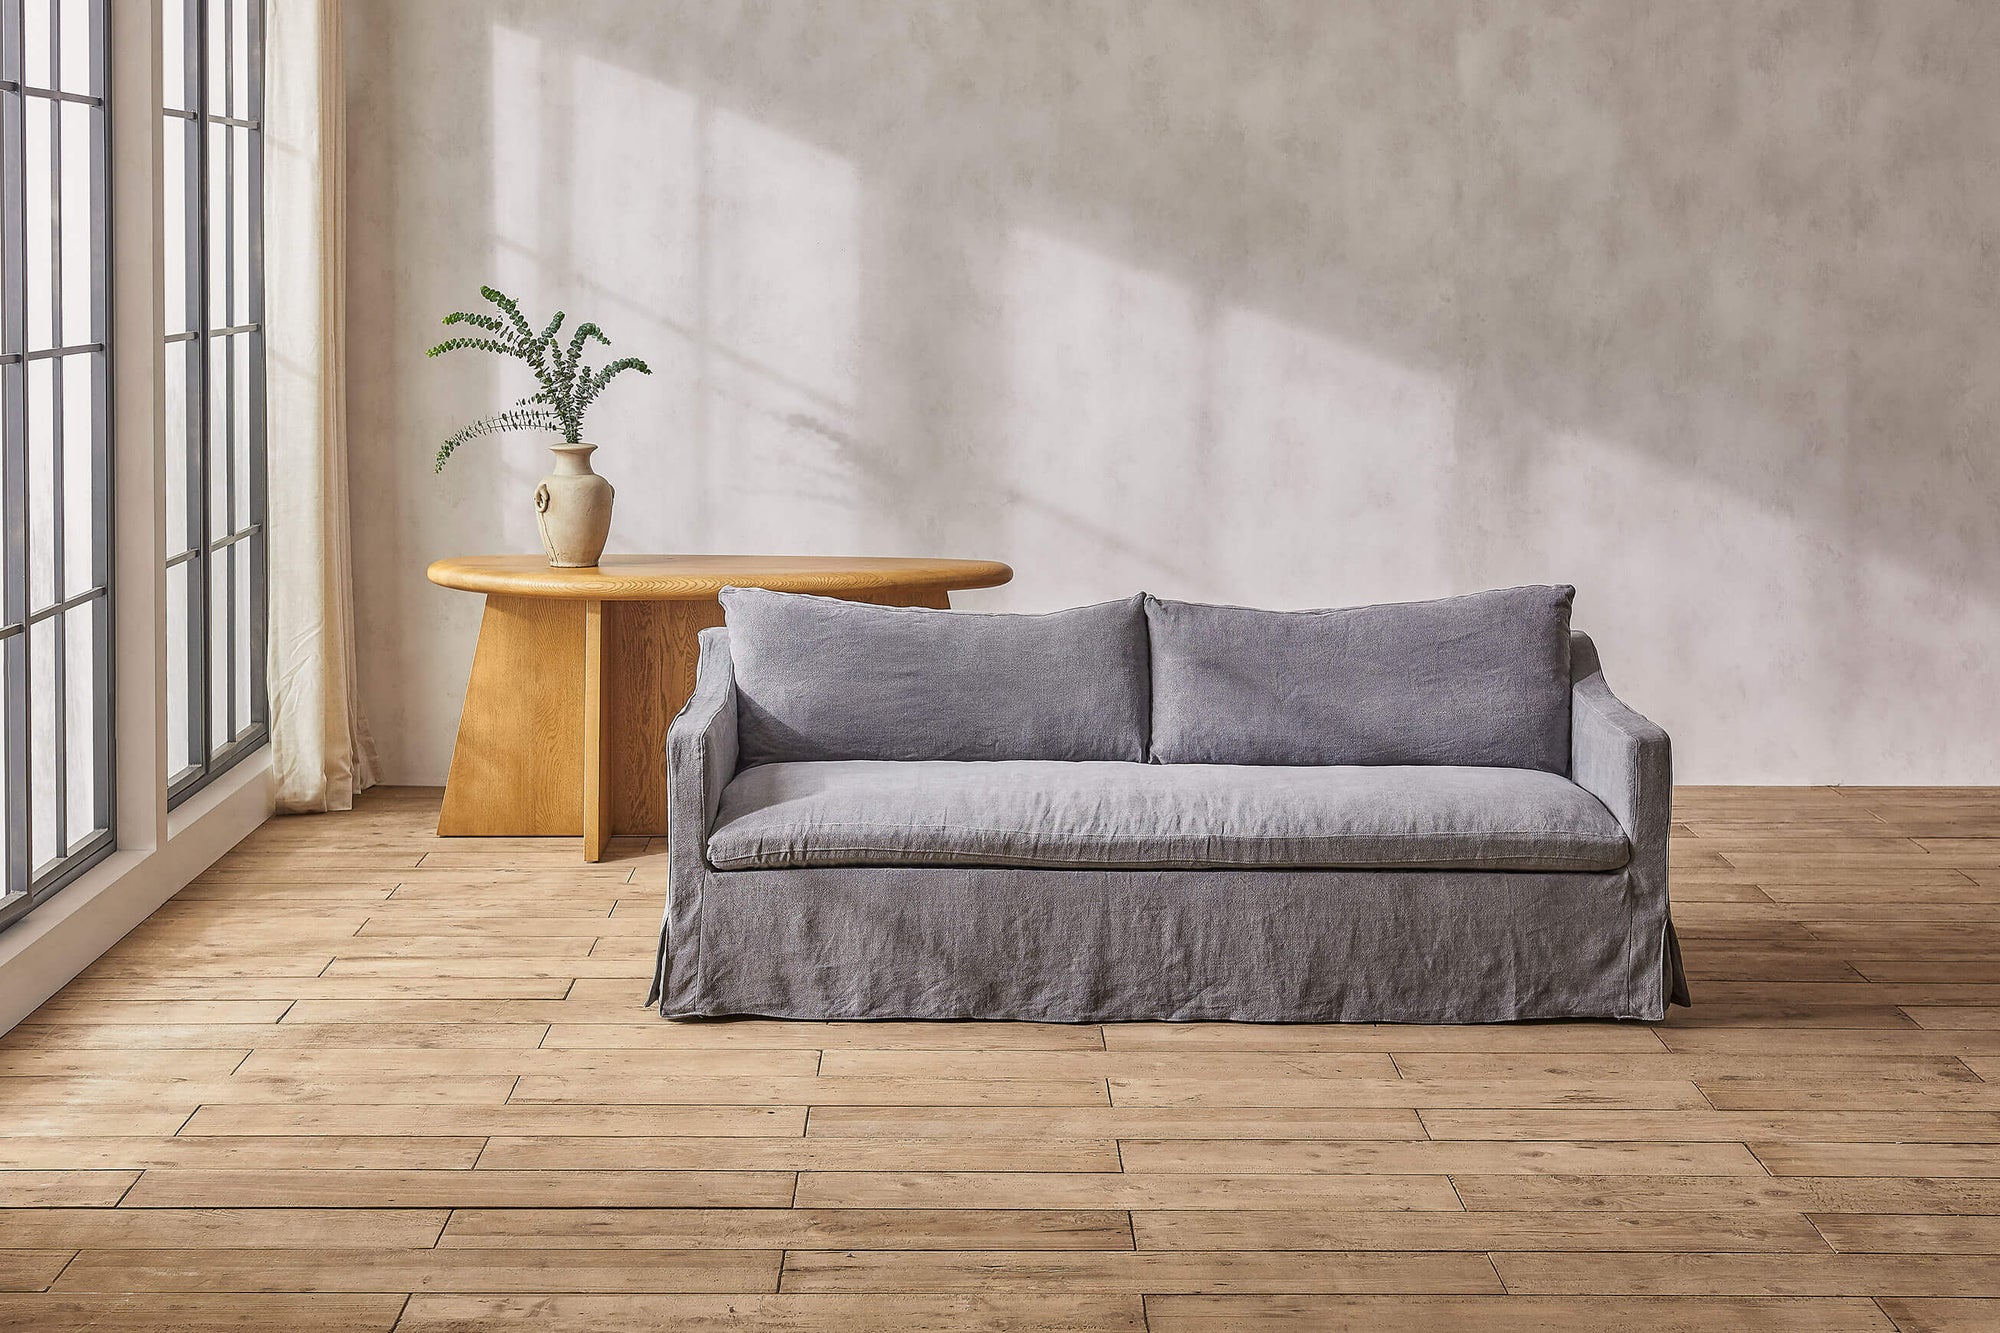 Amelia sofa in gray light weight linen placed in a sunlit room in front of a vase of ferns on a table